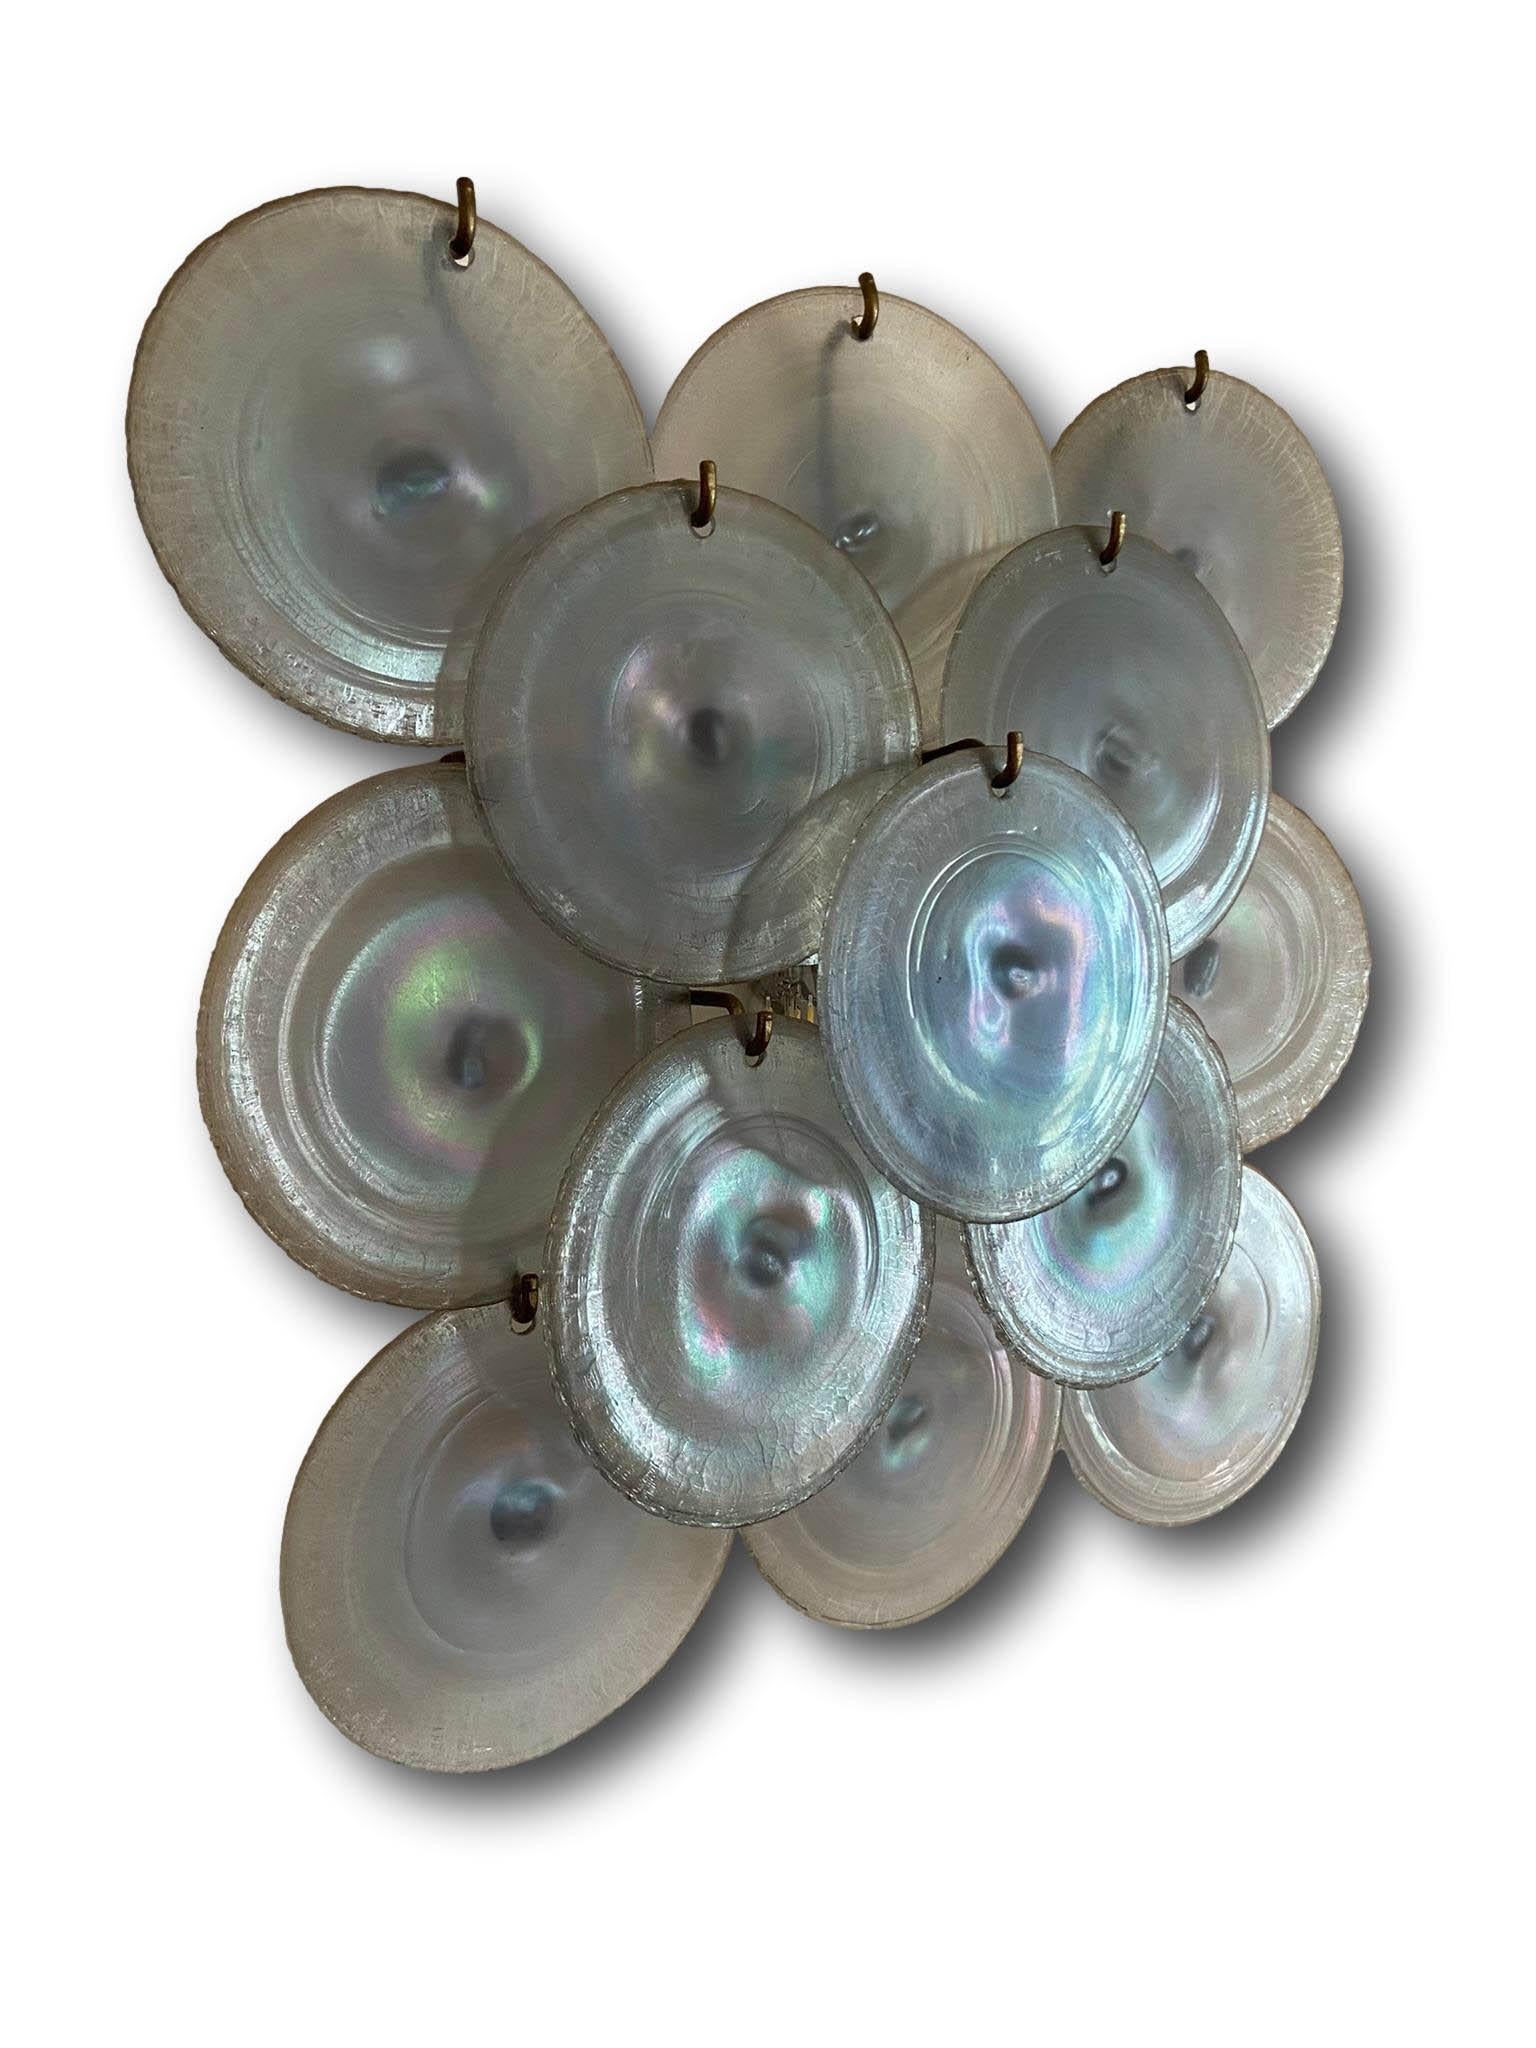 Large disc-shaped applique in irridescent Murano glass designed by Carlo Nason for Mazzega Murano, Italy 1960. The applique rests on a nickel-plated metal structure with two light sources.  Very good condition.  The glass, now impossible to find,